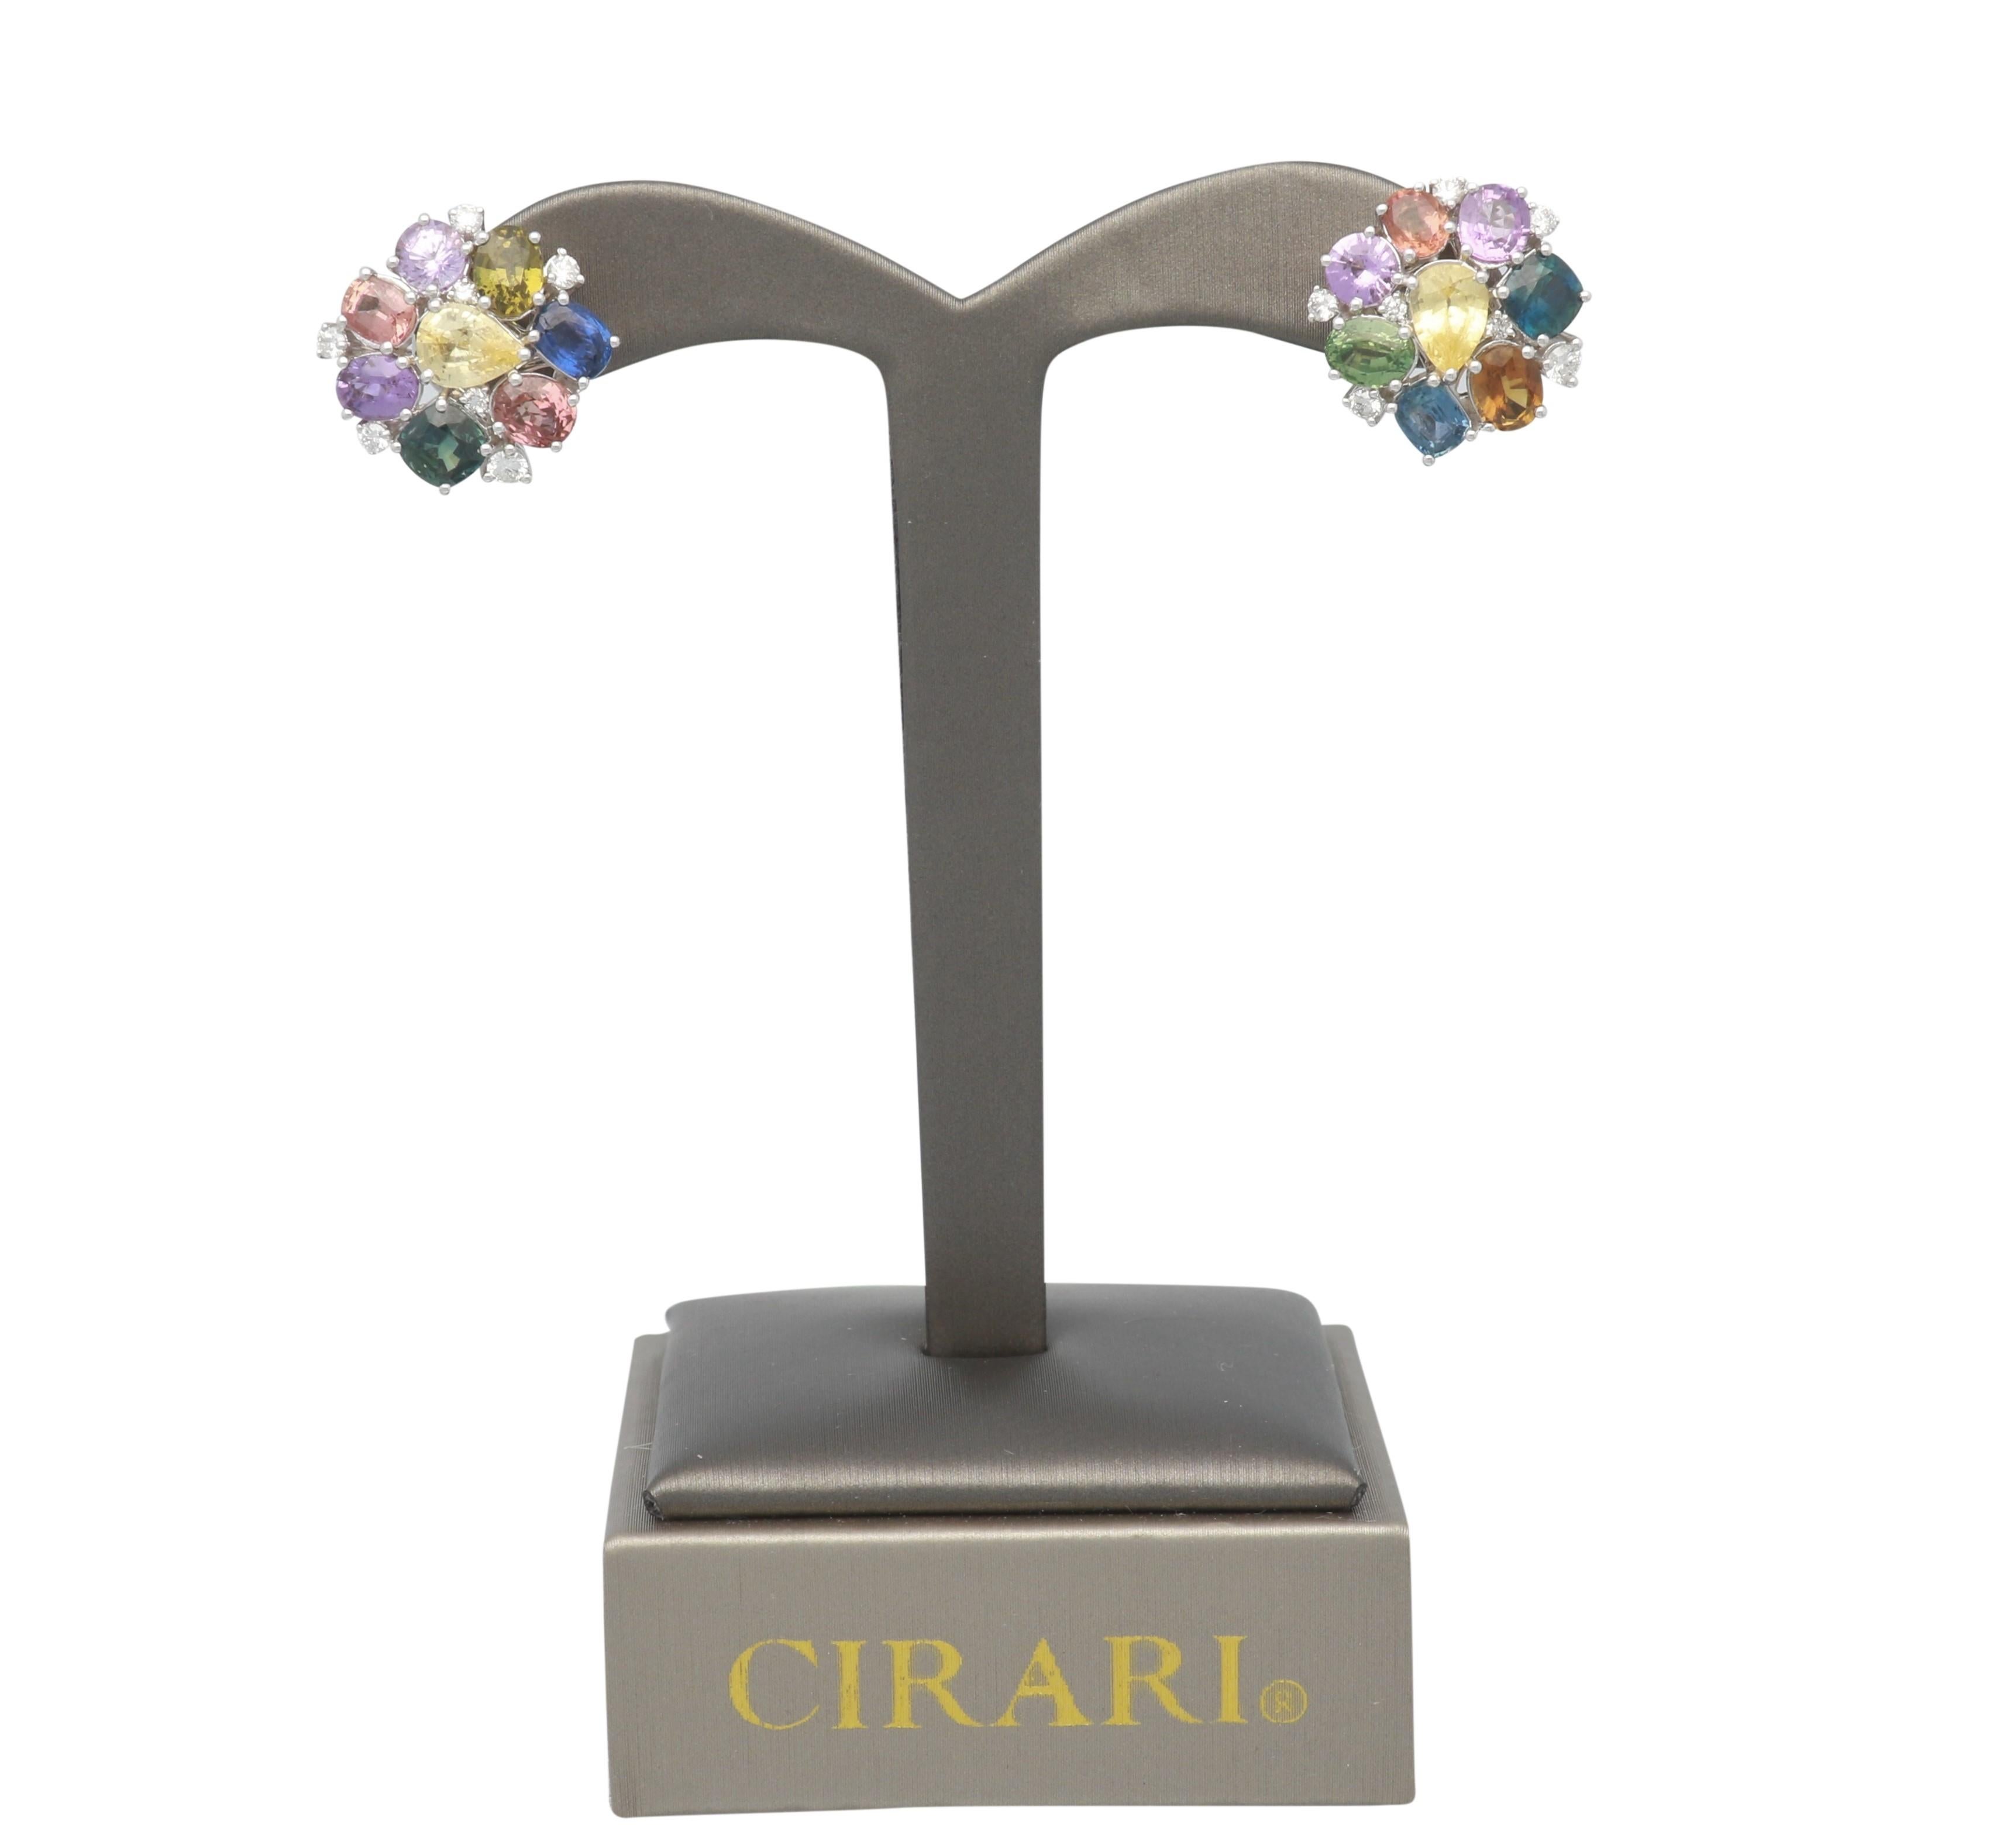 This beautiful Earring is crafted in 18-karat White Gold and features 16 IGL Certified Multi Color Sapphires with 10.92 Carat and 14 round Brilliant cut Diamonds 0.45 carat. This earring is secured with Post back, and is a perfect gift either for